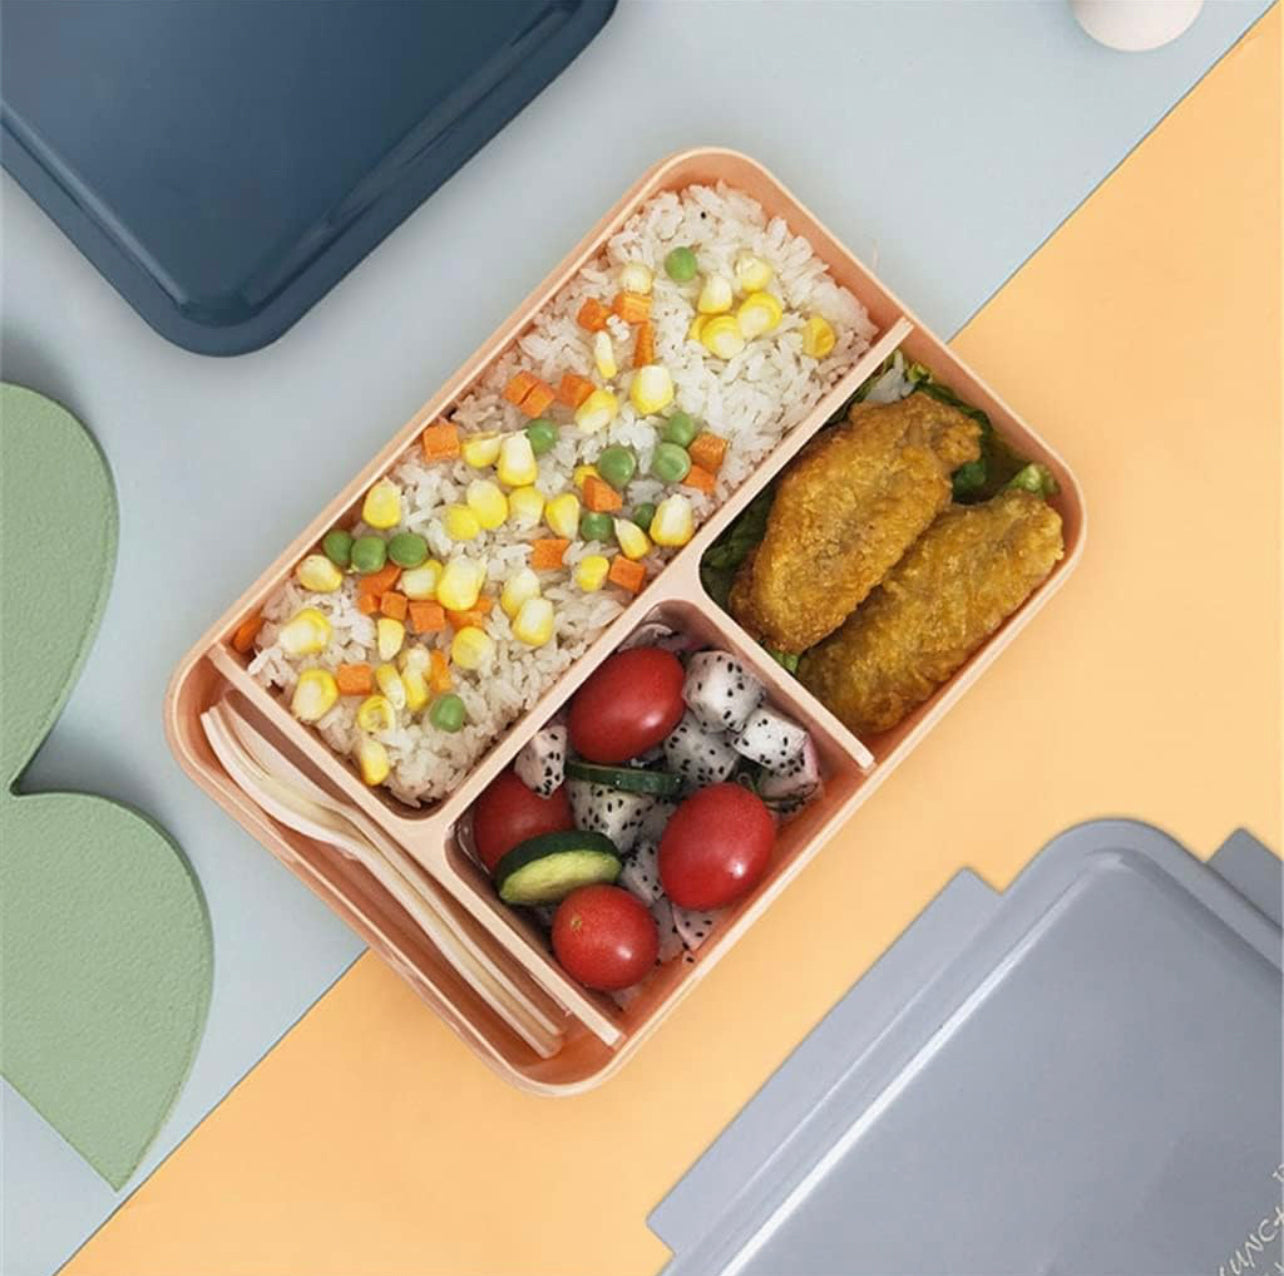 Lunch box 4 Compartments 1.25 L Blue Bottom || لانش بوكس مقسم ٤ لون ازرق